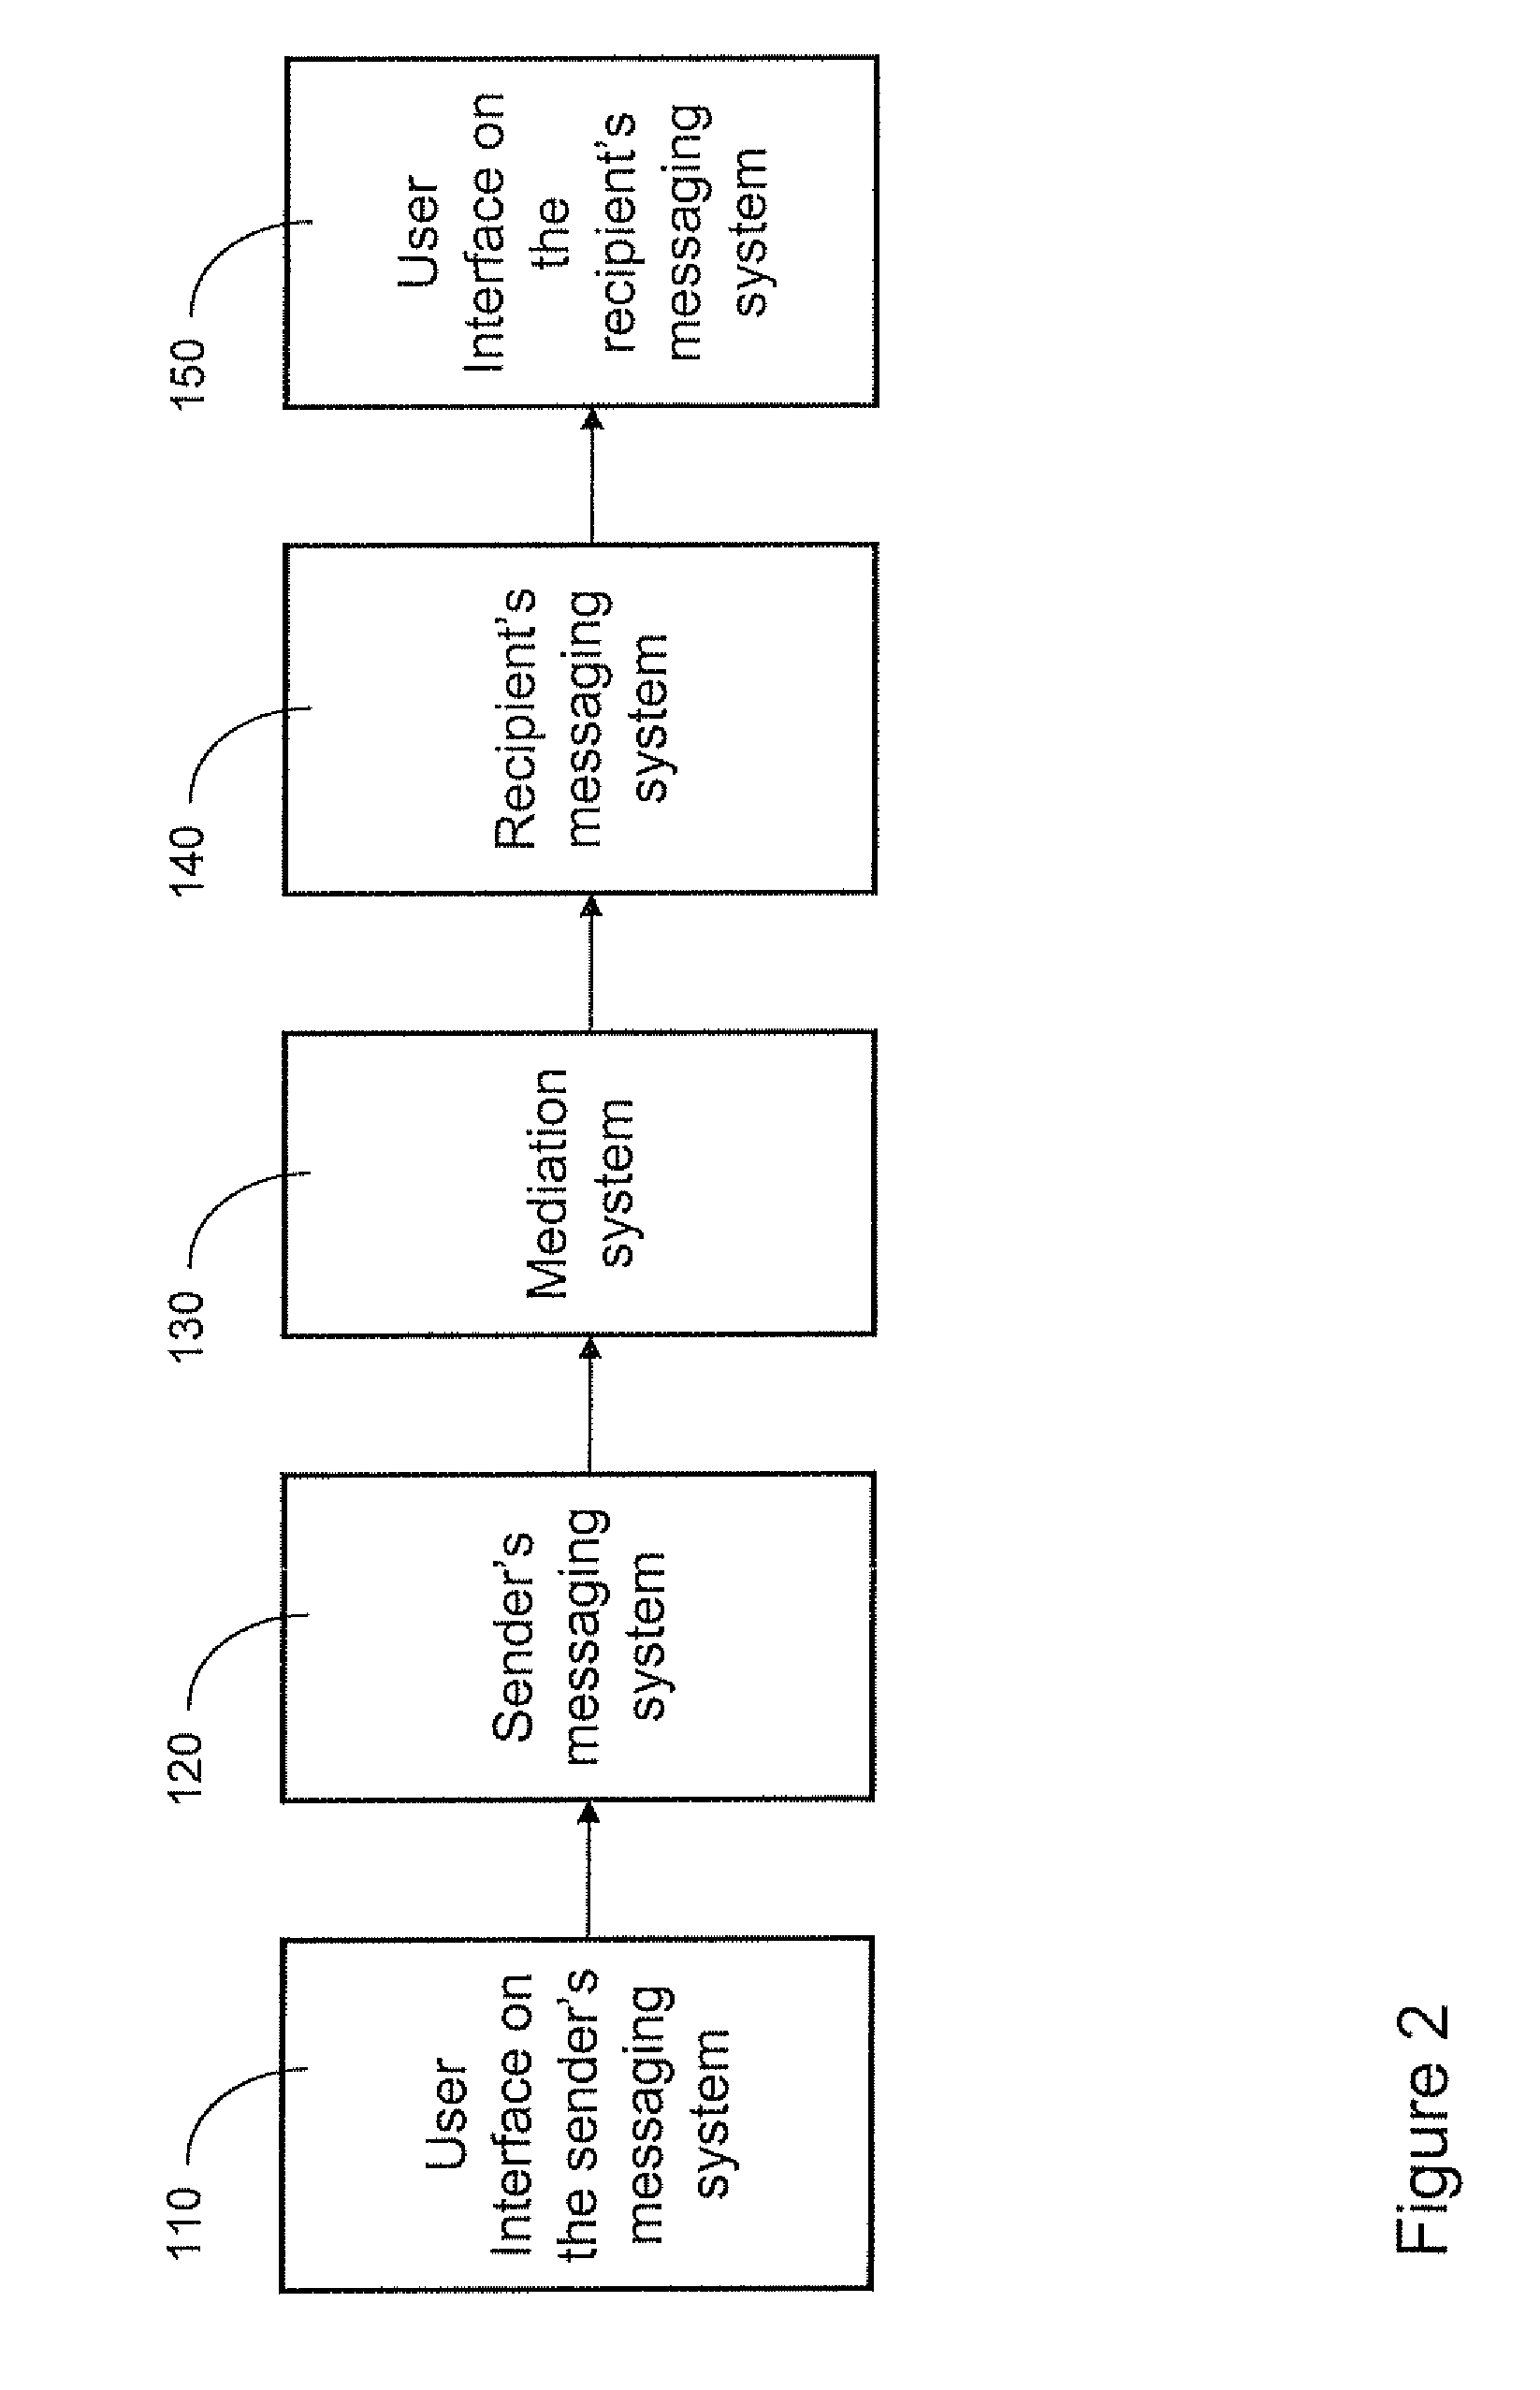 Method and apparatus for enabling messaging between users of different social networks and between users of social networks and users of other communication systems